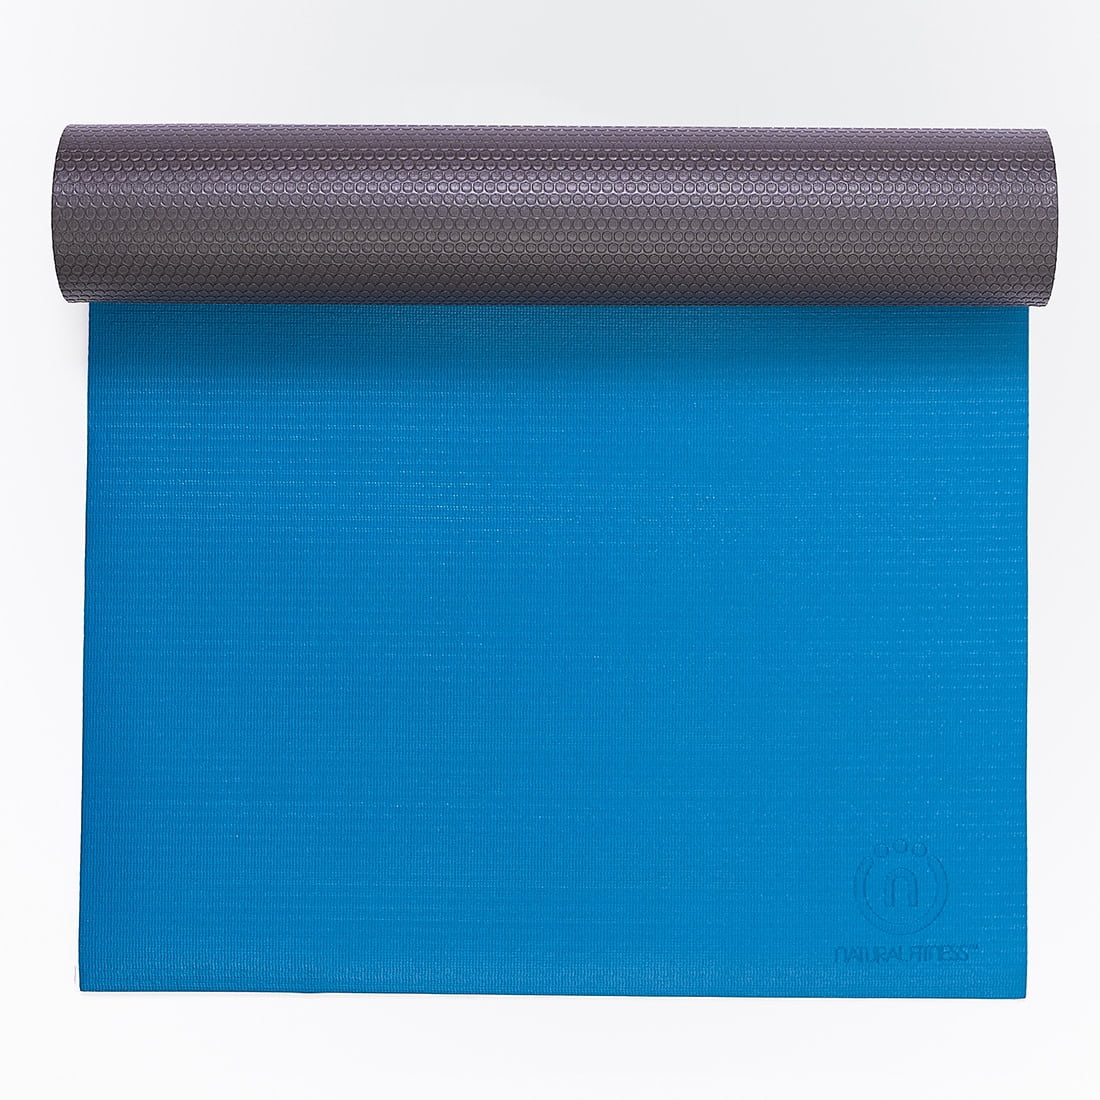 Yoga-Mad Warrior II Yoga Mat Stretching Perfect for Pilates 183cm x 61cm x 4mm Yoga Non Slip Lightweight Exercise Mat Home Workouts and General Fitness 